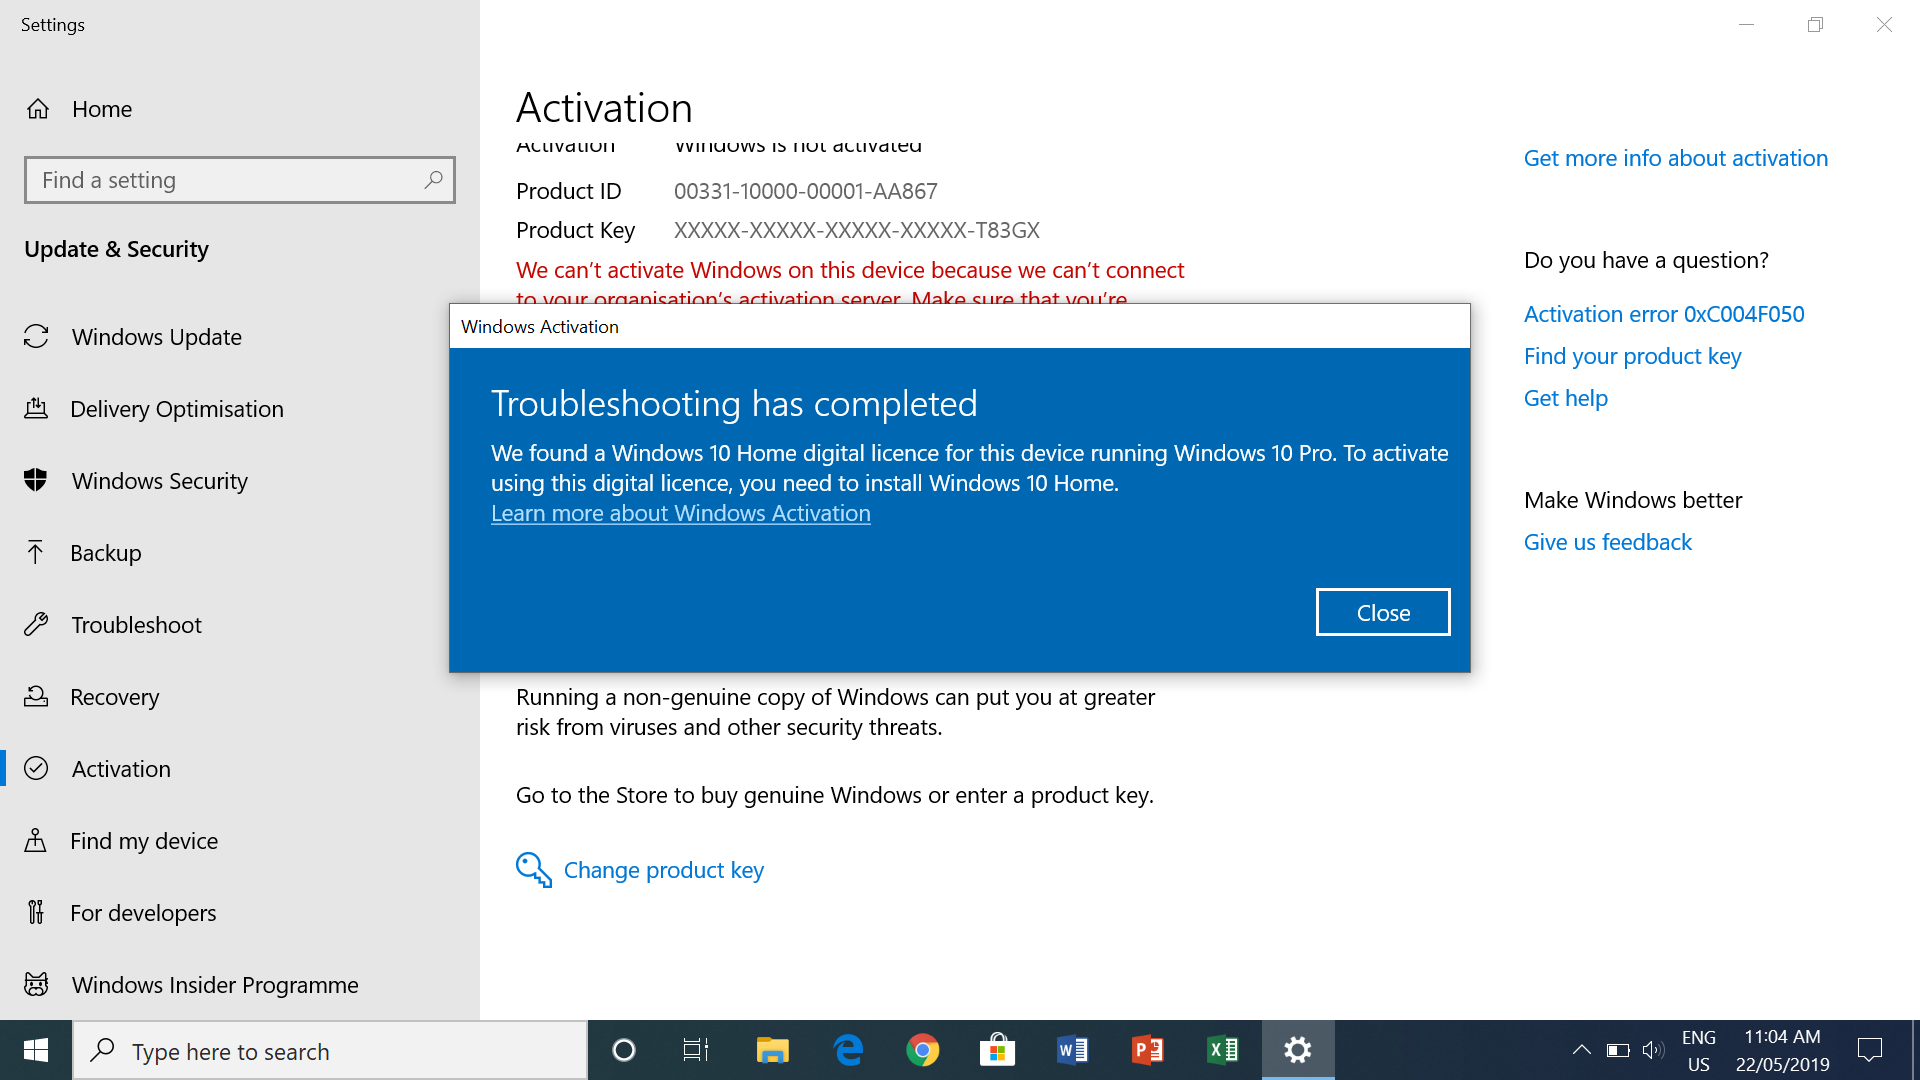 Issues with activating Windows 10 Home e639728d-24dc-485f-957e-8042ad493c6d?upload=true.png